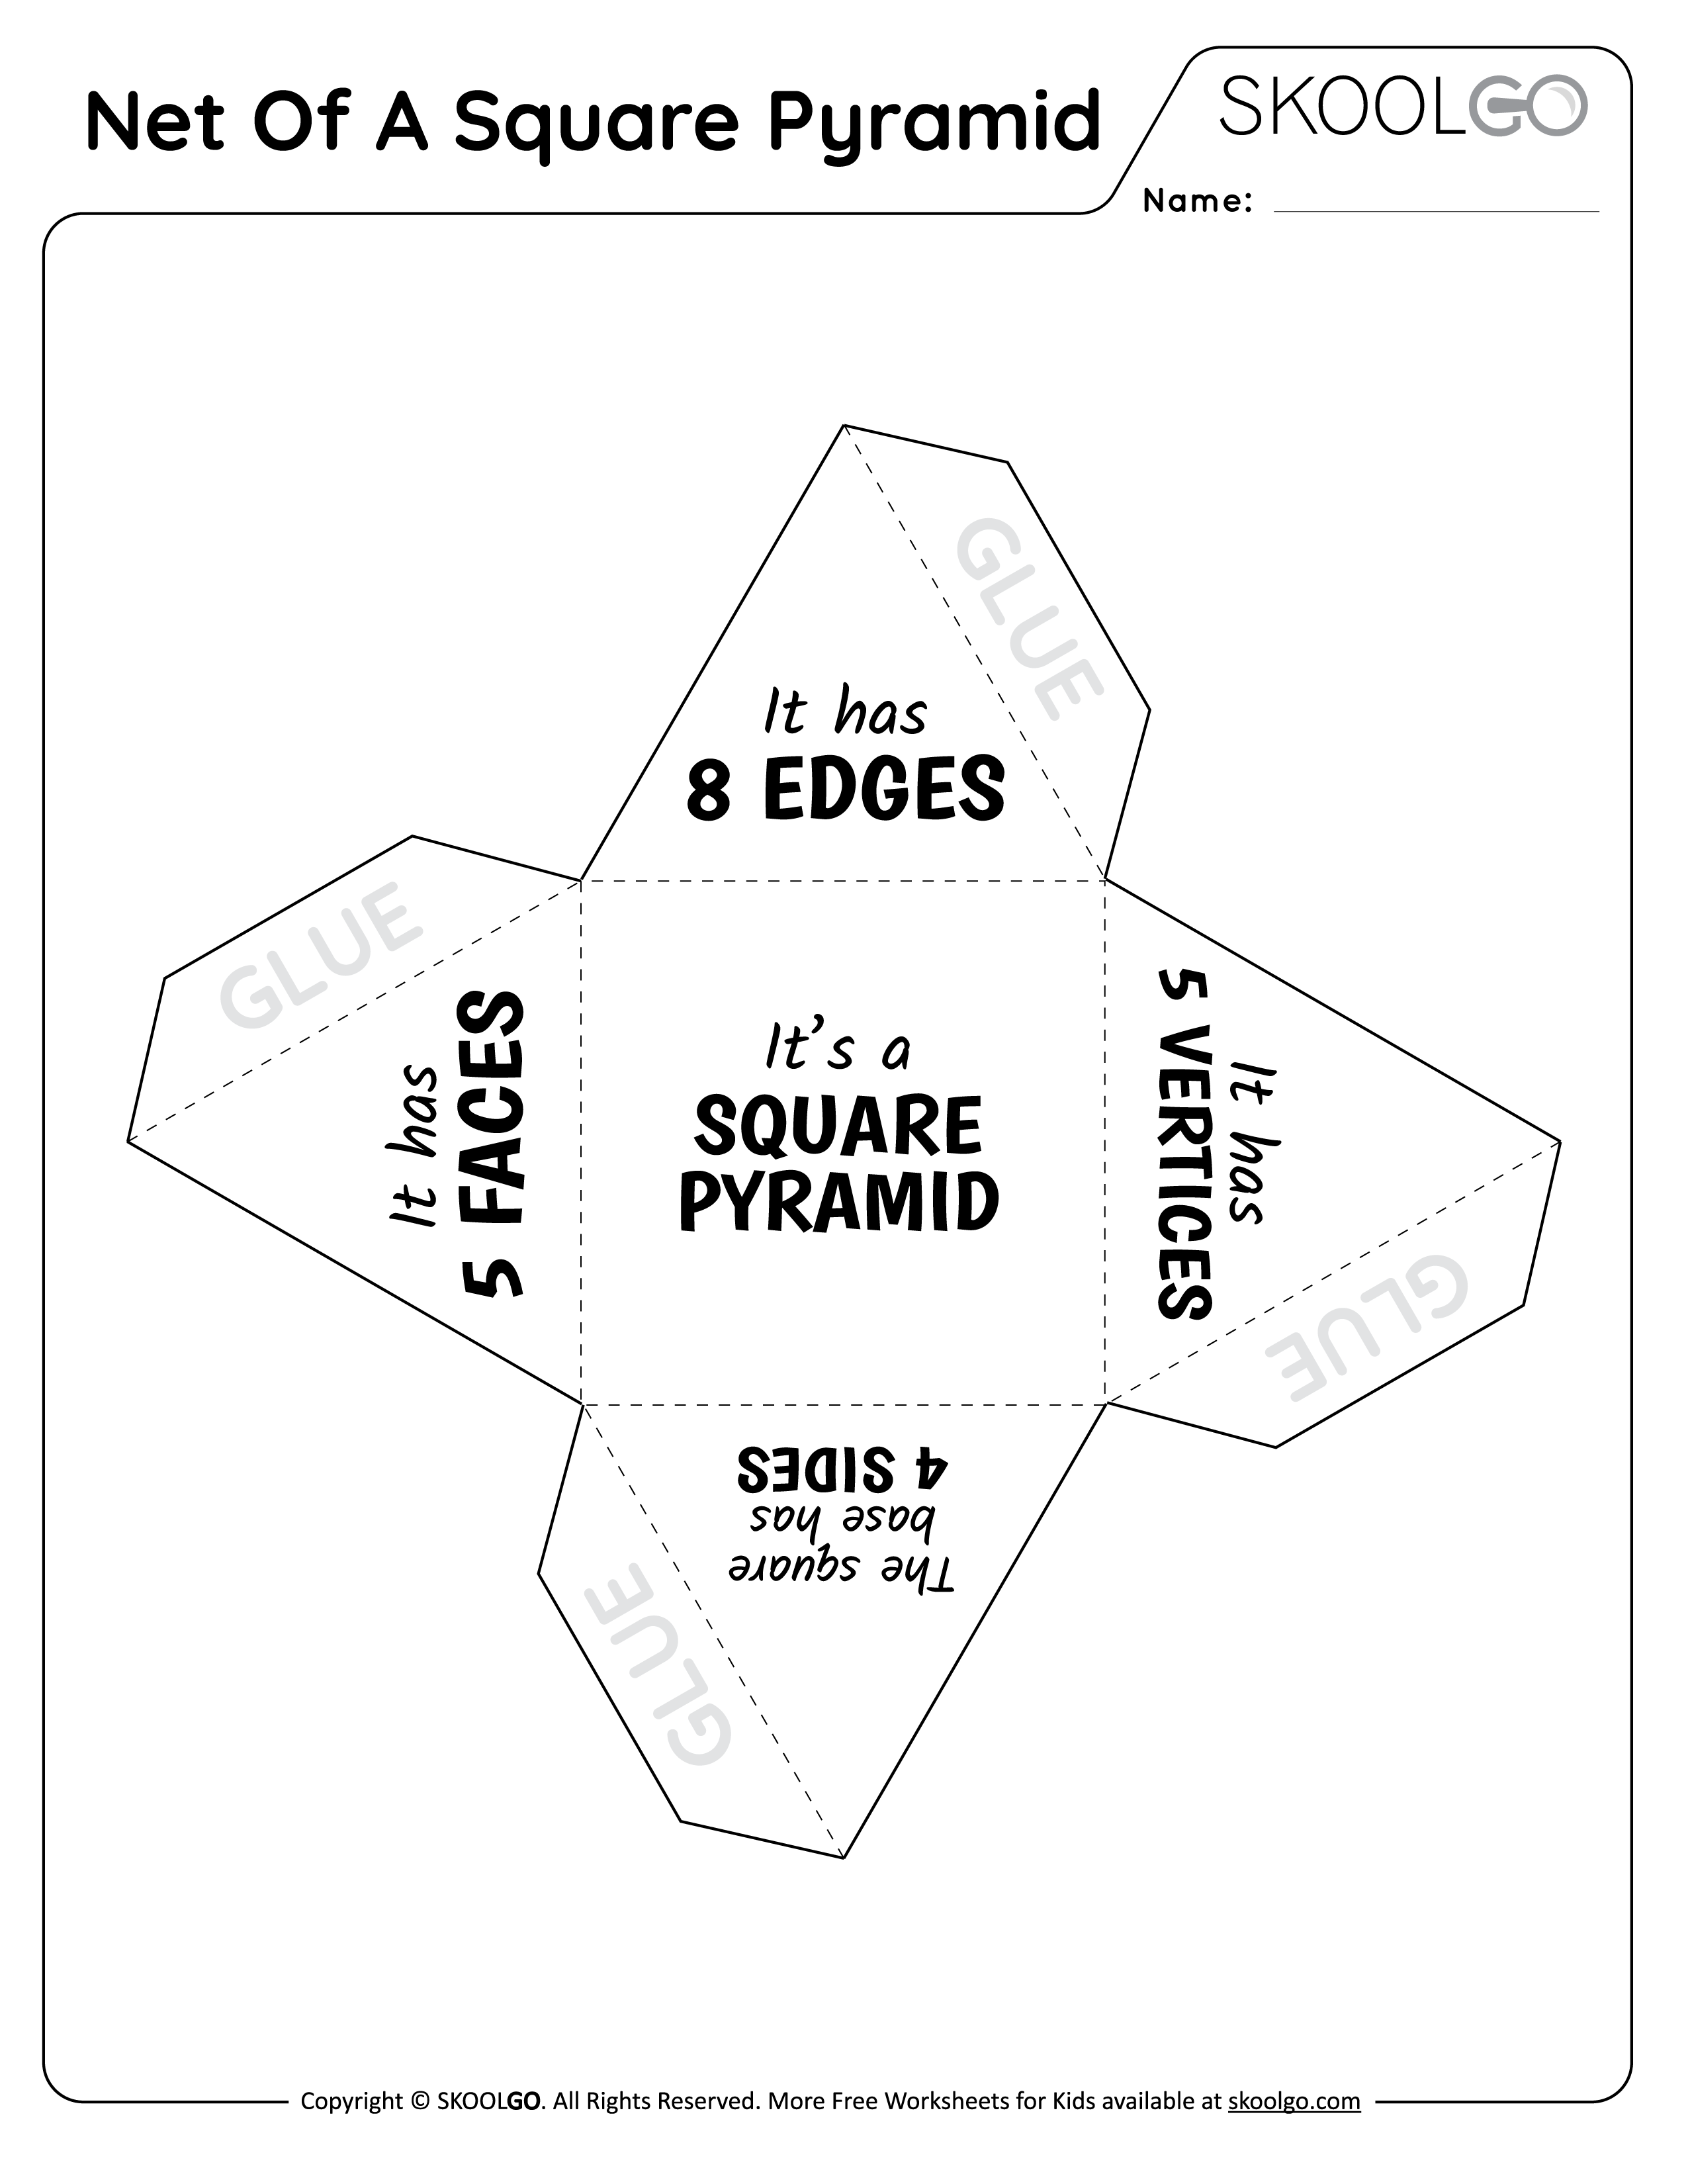 Net Of A Square Pyramid - Free Worksheet for Kids - Black and White